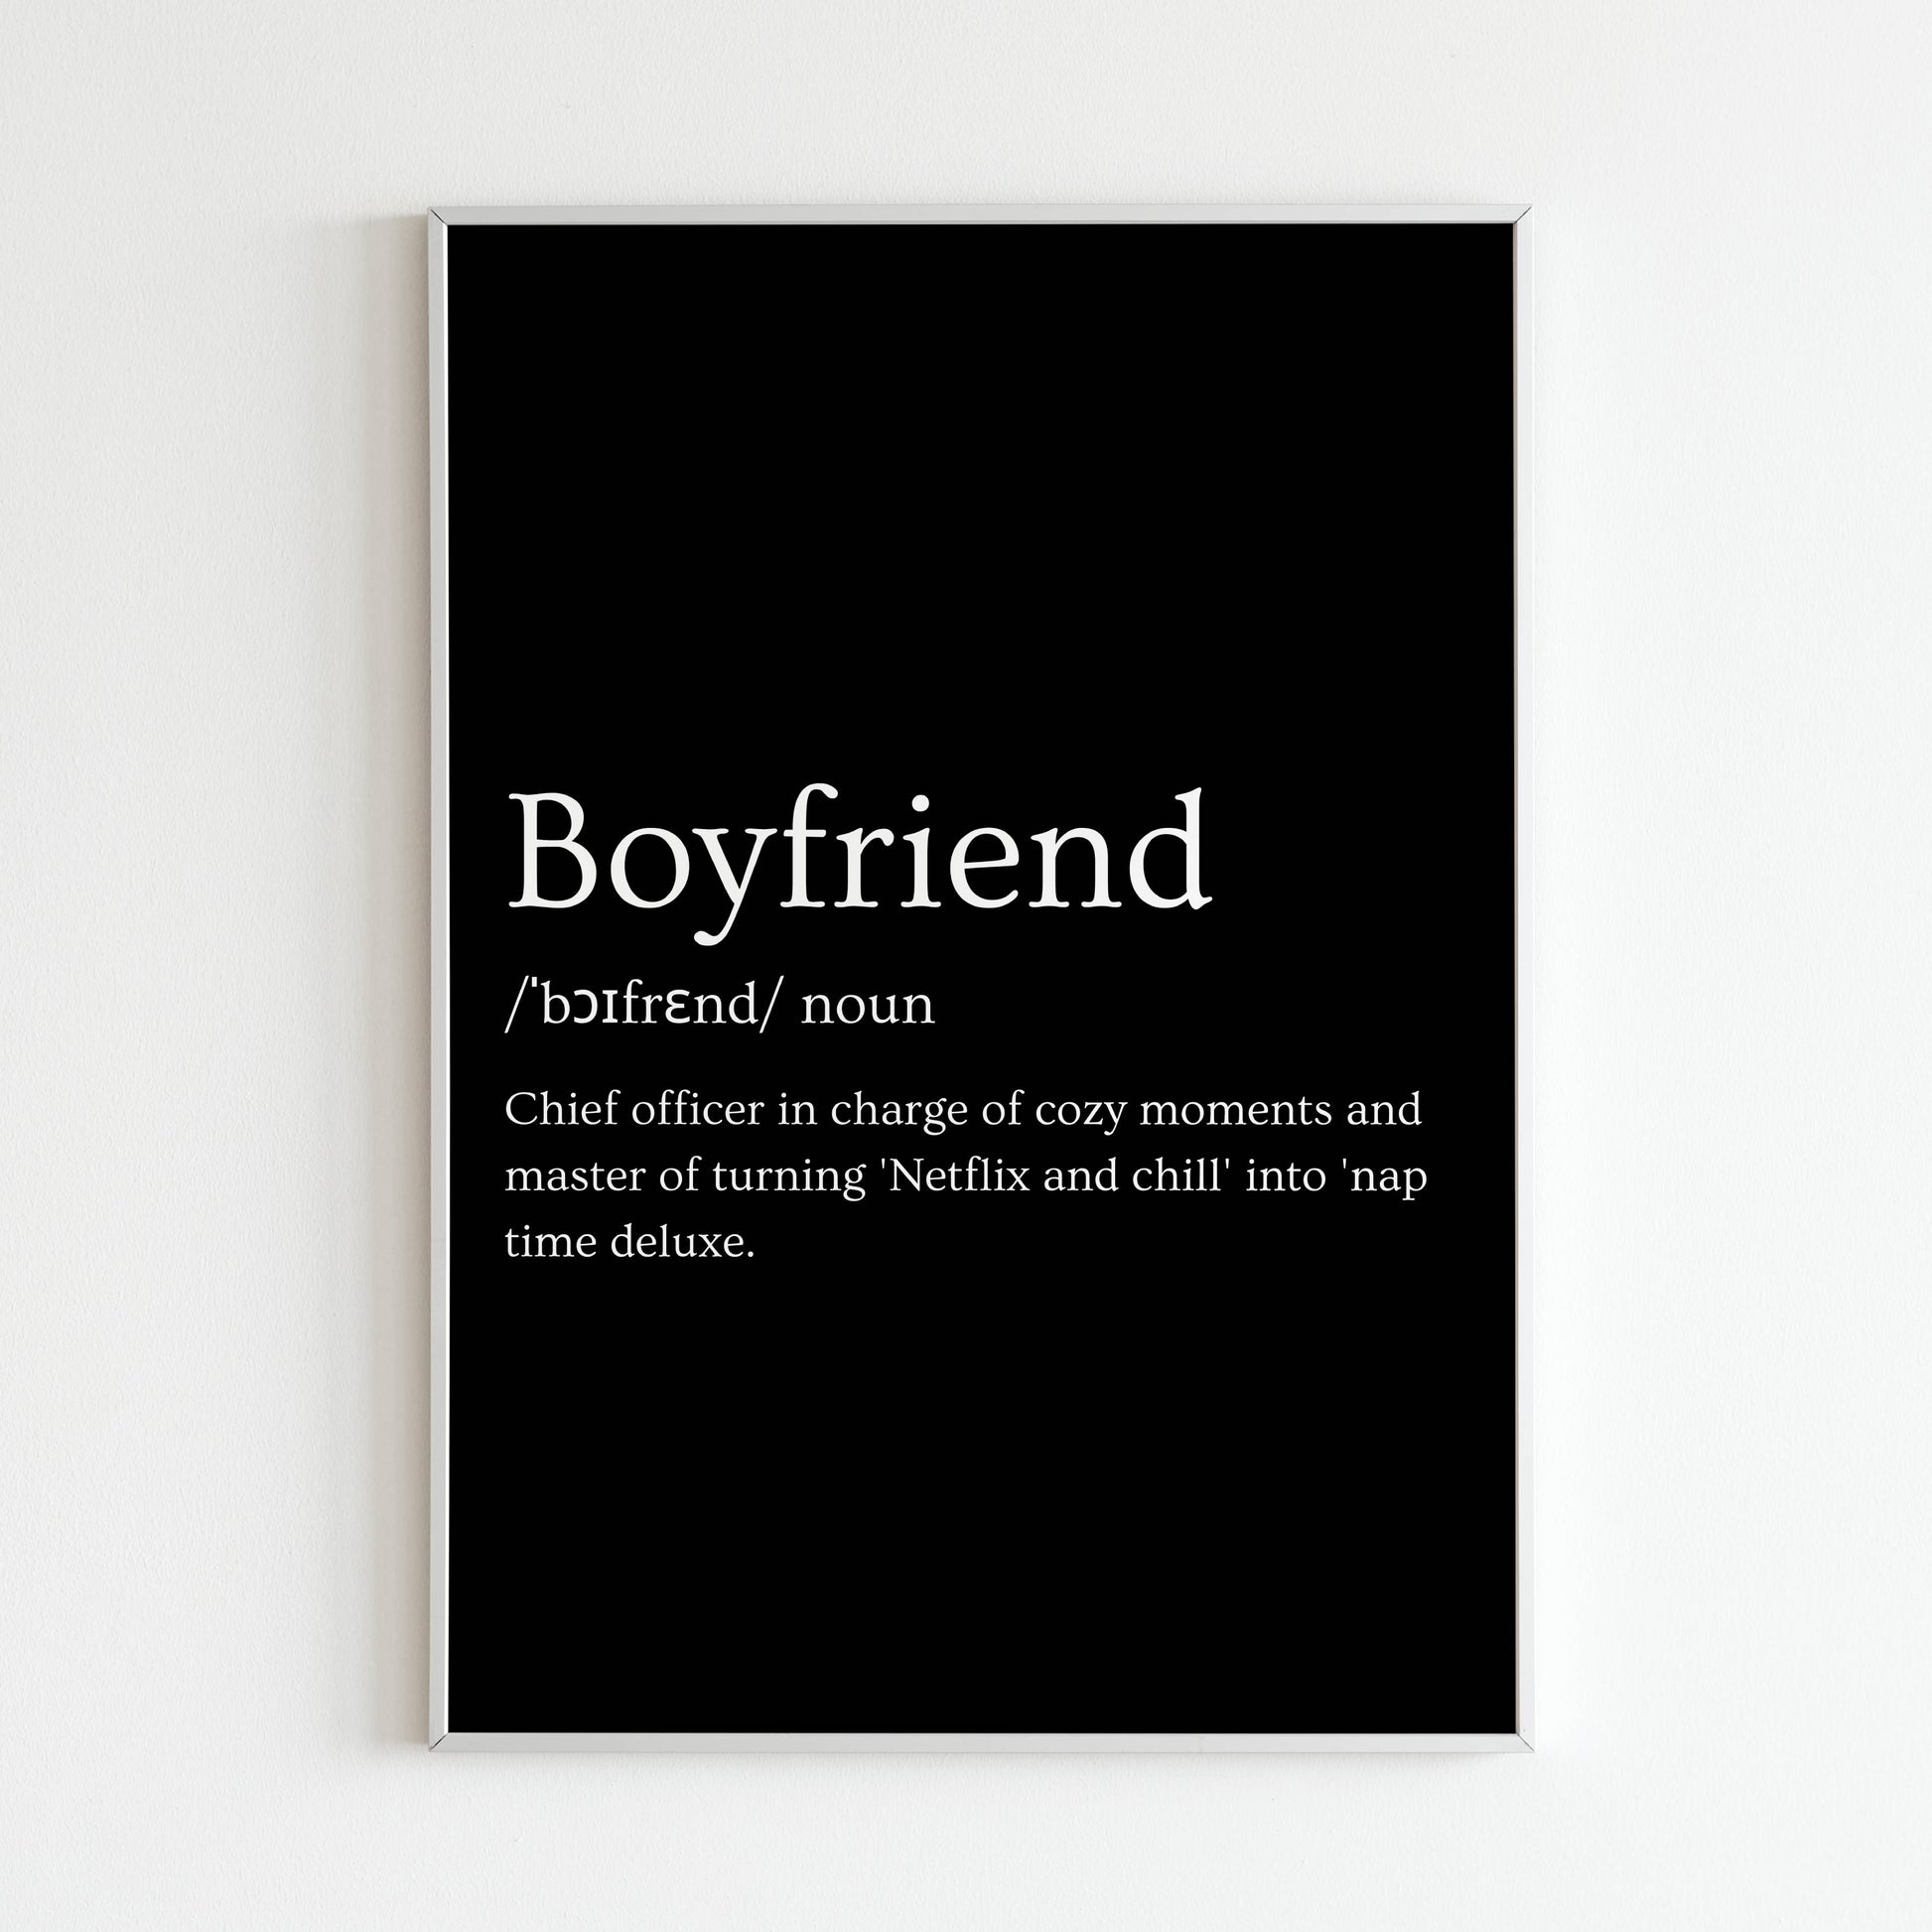 Downloadable "Boyfriend" art print, express the joys of love and partnership with a playful design.